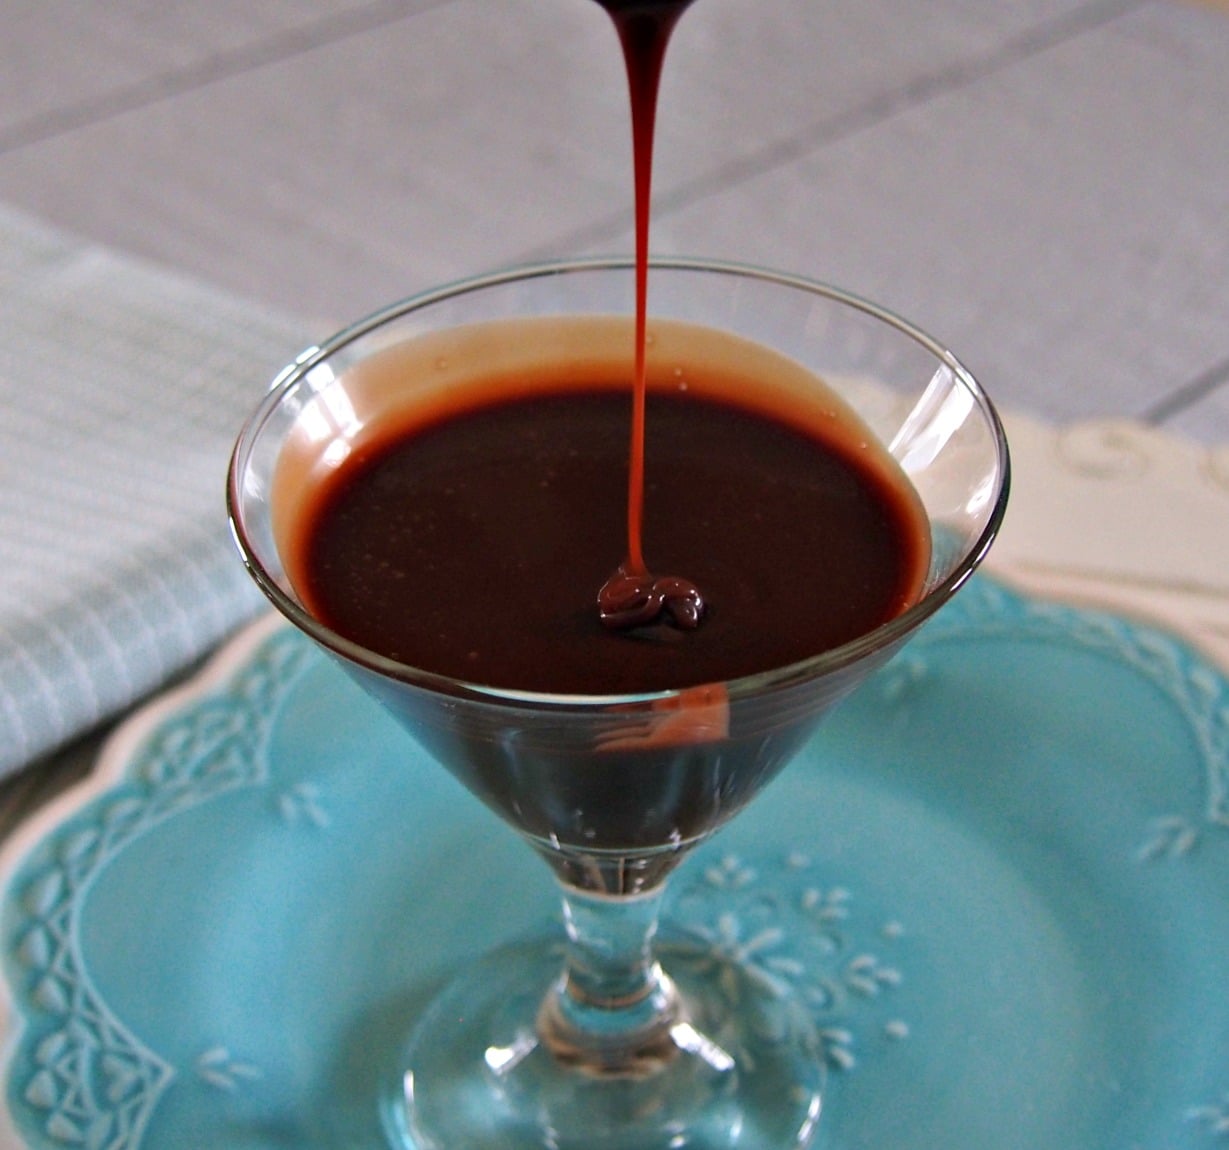 Homemade Hot Fudge Sauce with Frangelico is creamy, chocolatey perfection Scrumptious!! www.simplysated.com